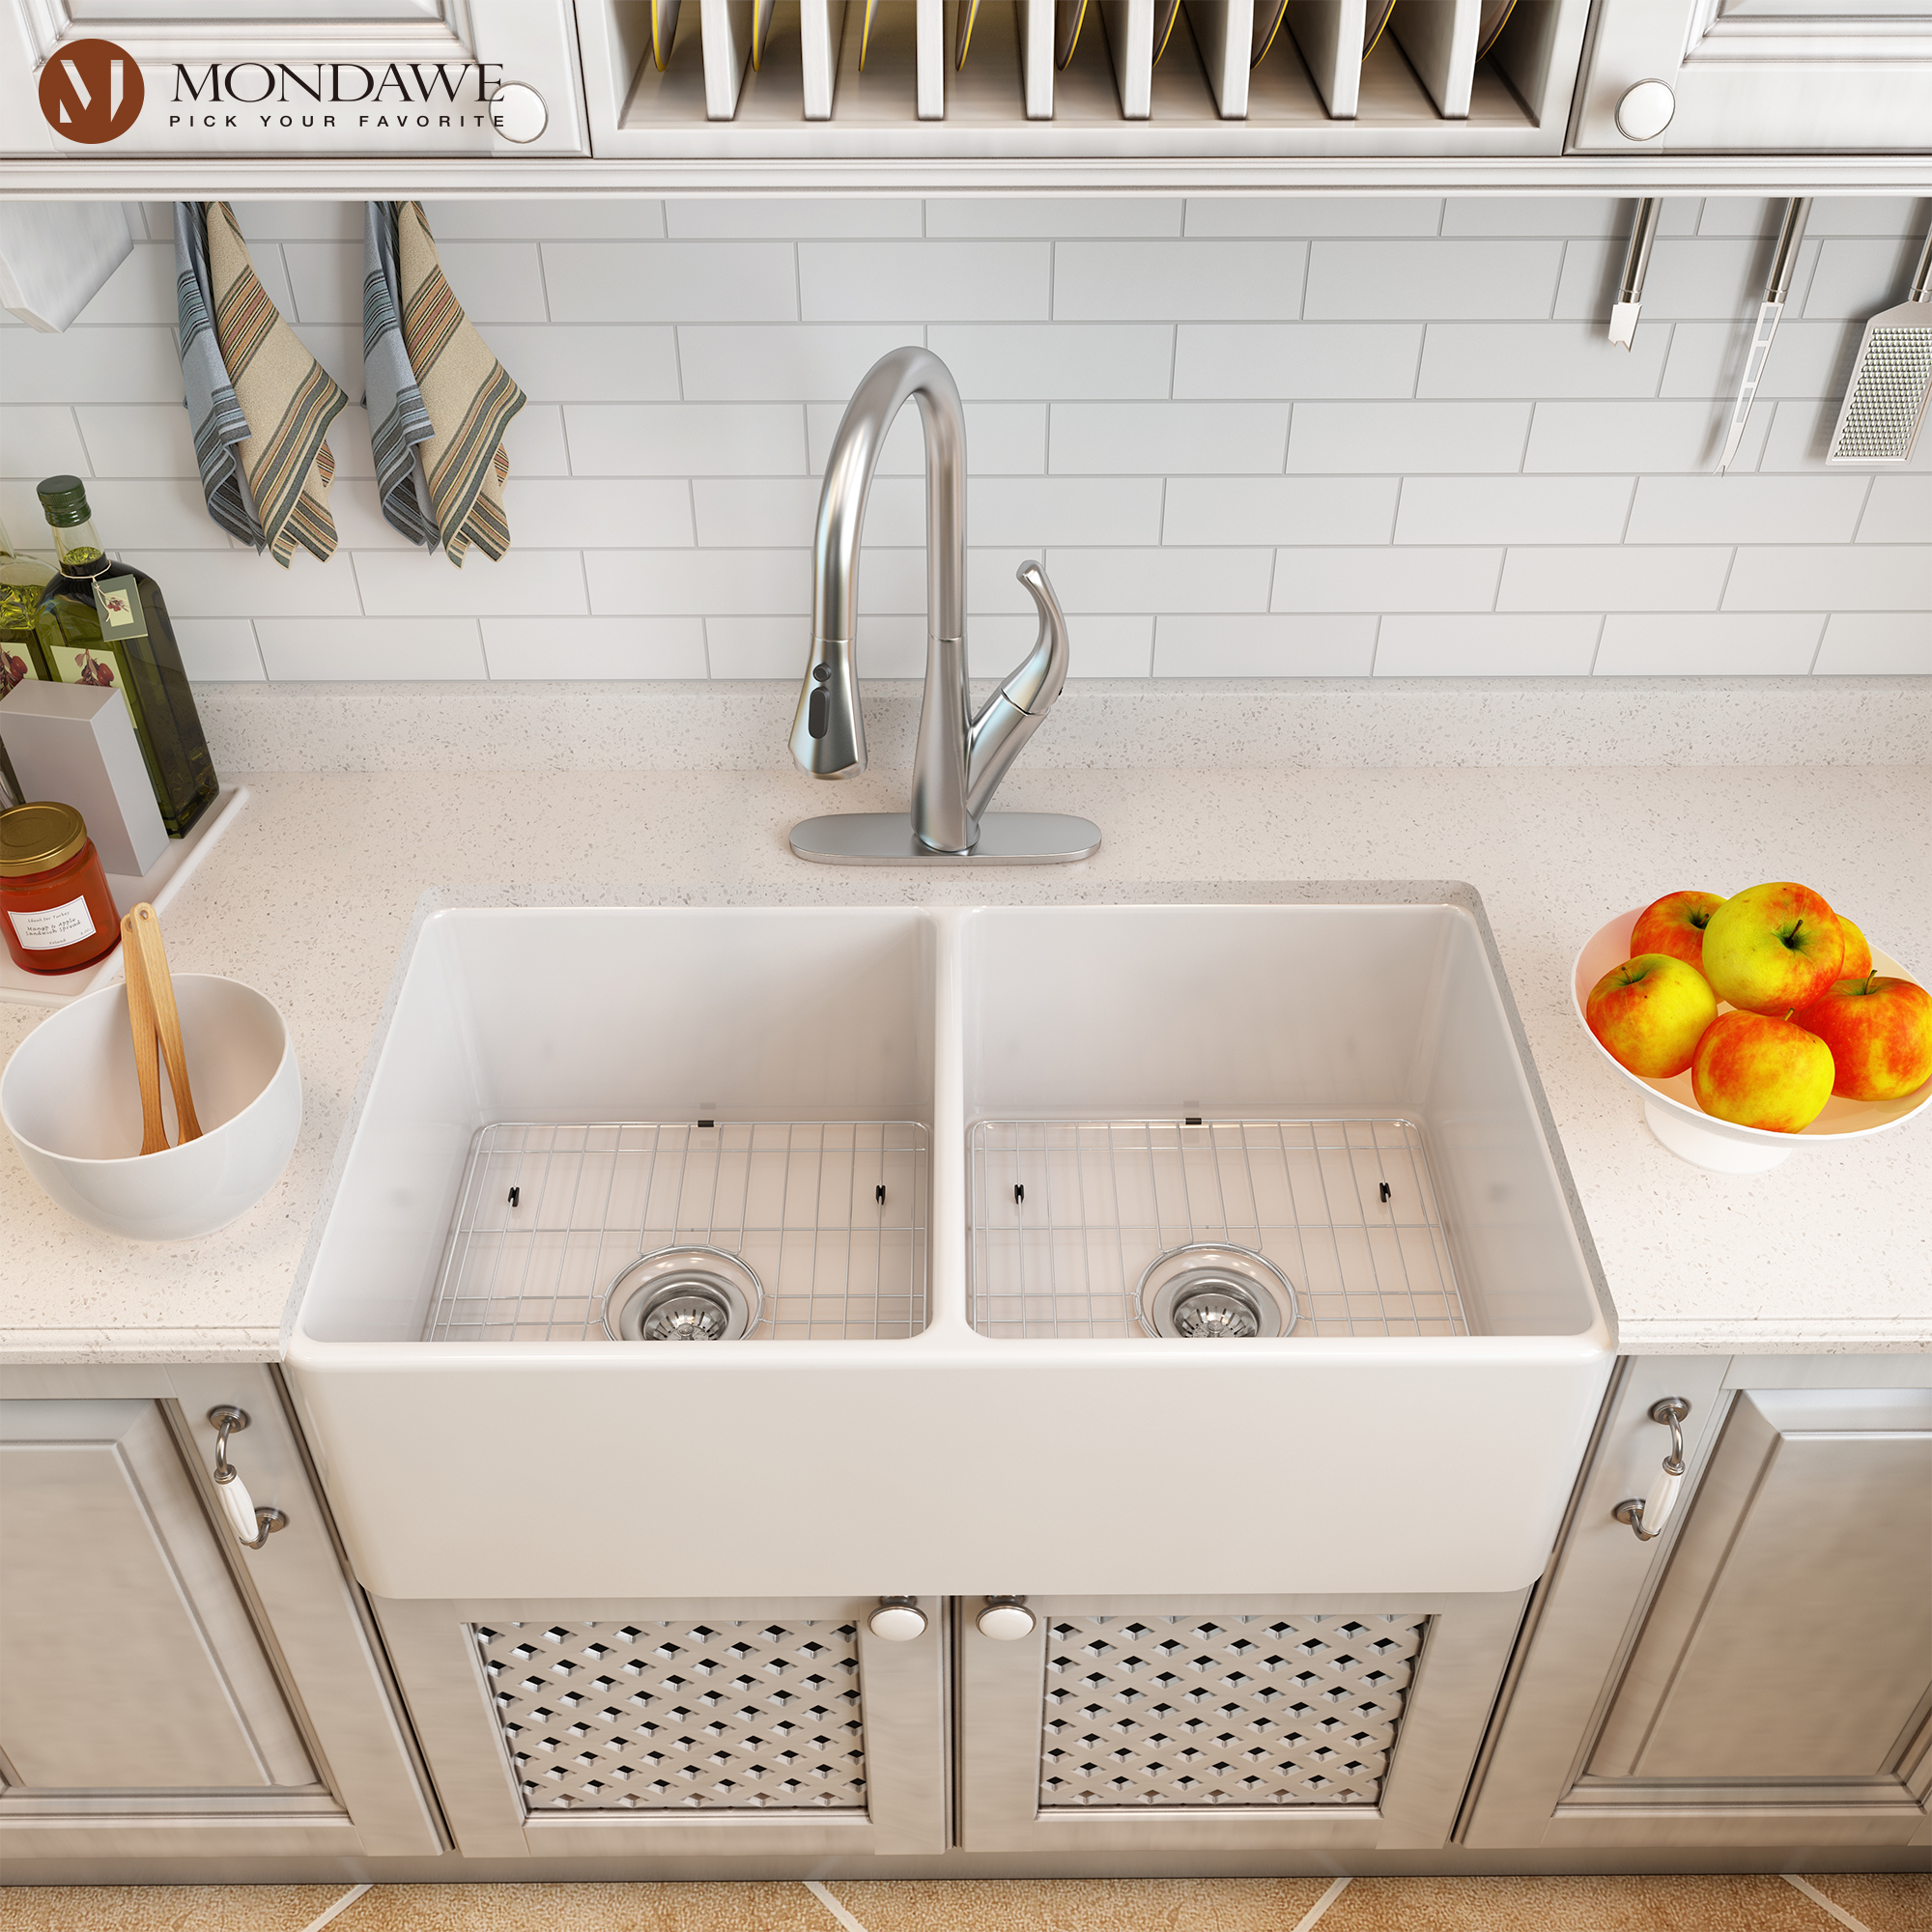 Farmhouse 33 In. Single Bowl Fireclay Kitchen Sink In White Comes With Pull Down Kitchen Faucet-Mondawe